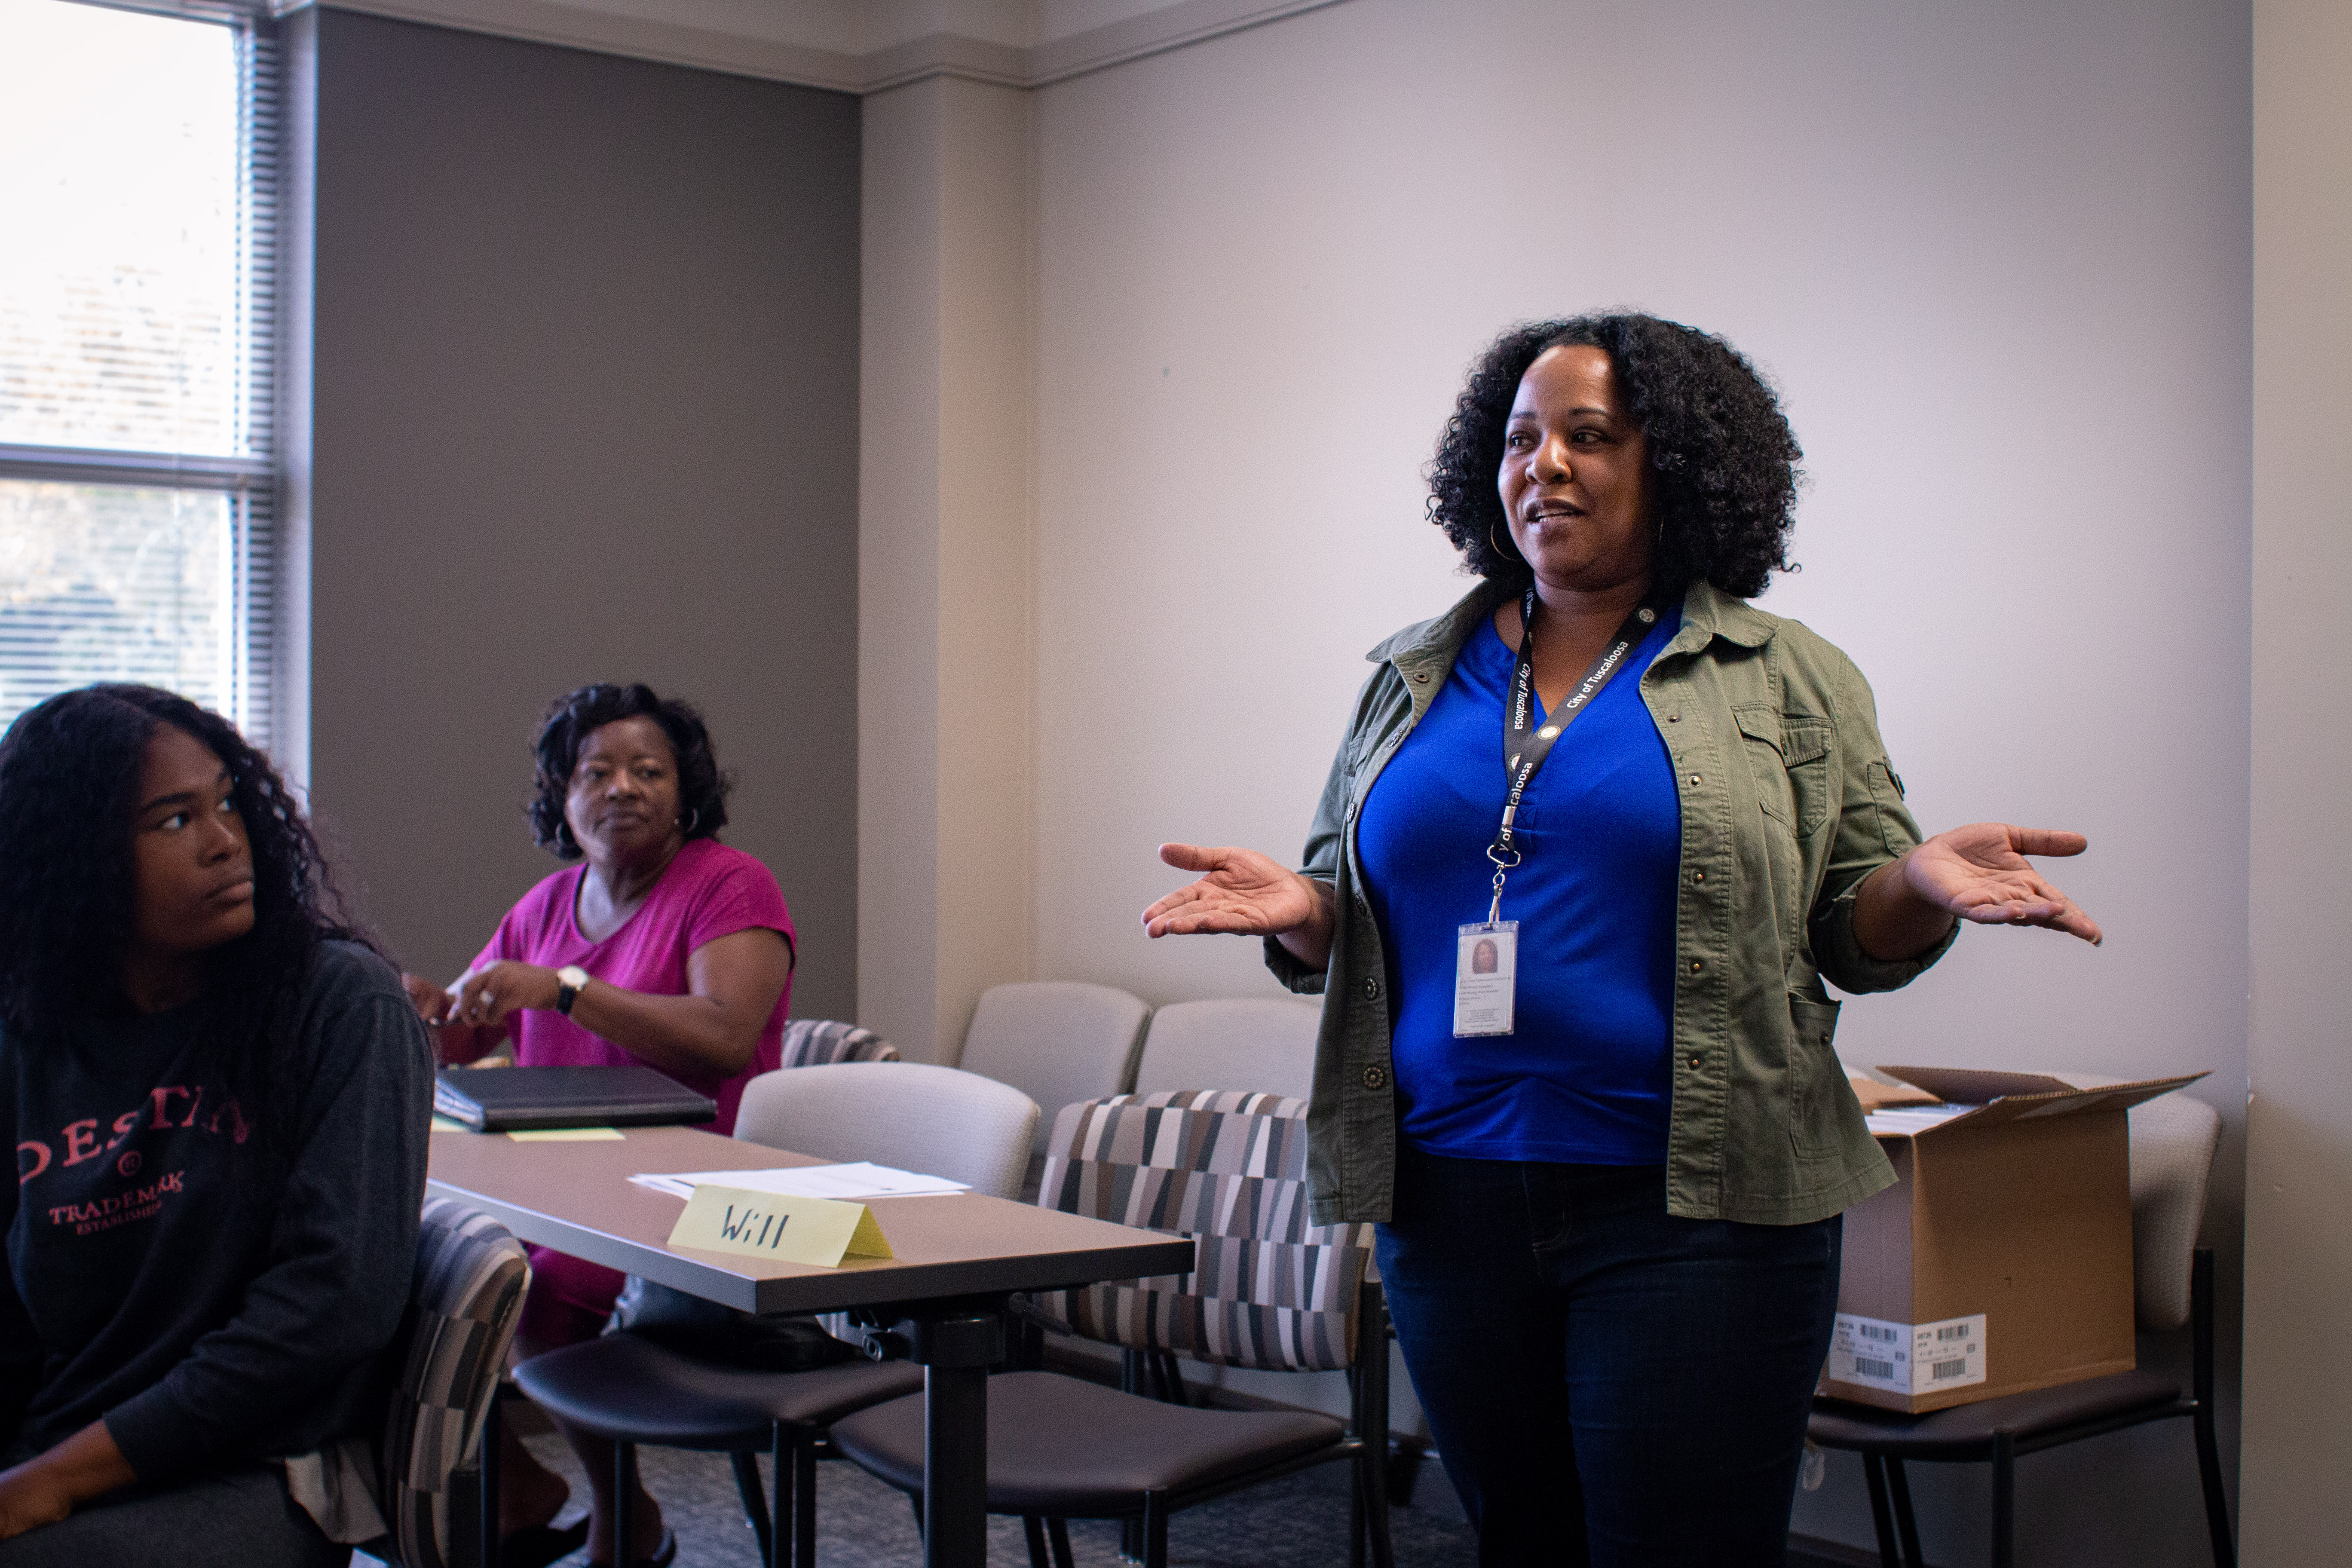 Kim Montgomery, Community Service Coordinator for the City of Tuscaloosa, describes Tuscaloosa's homeless population and need for supportive housing.